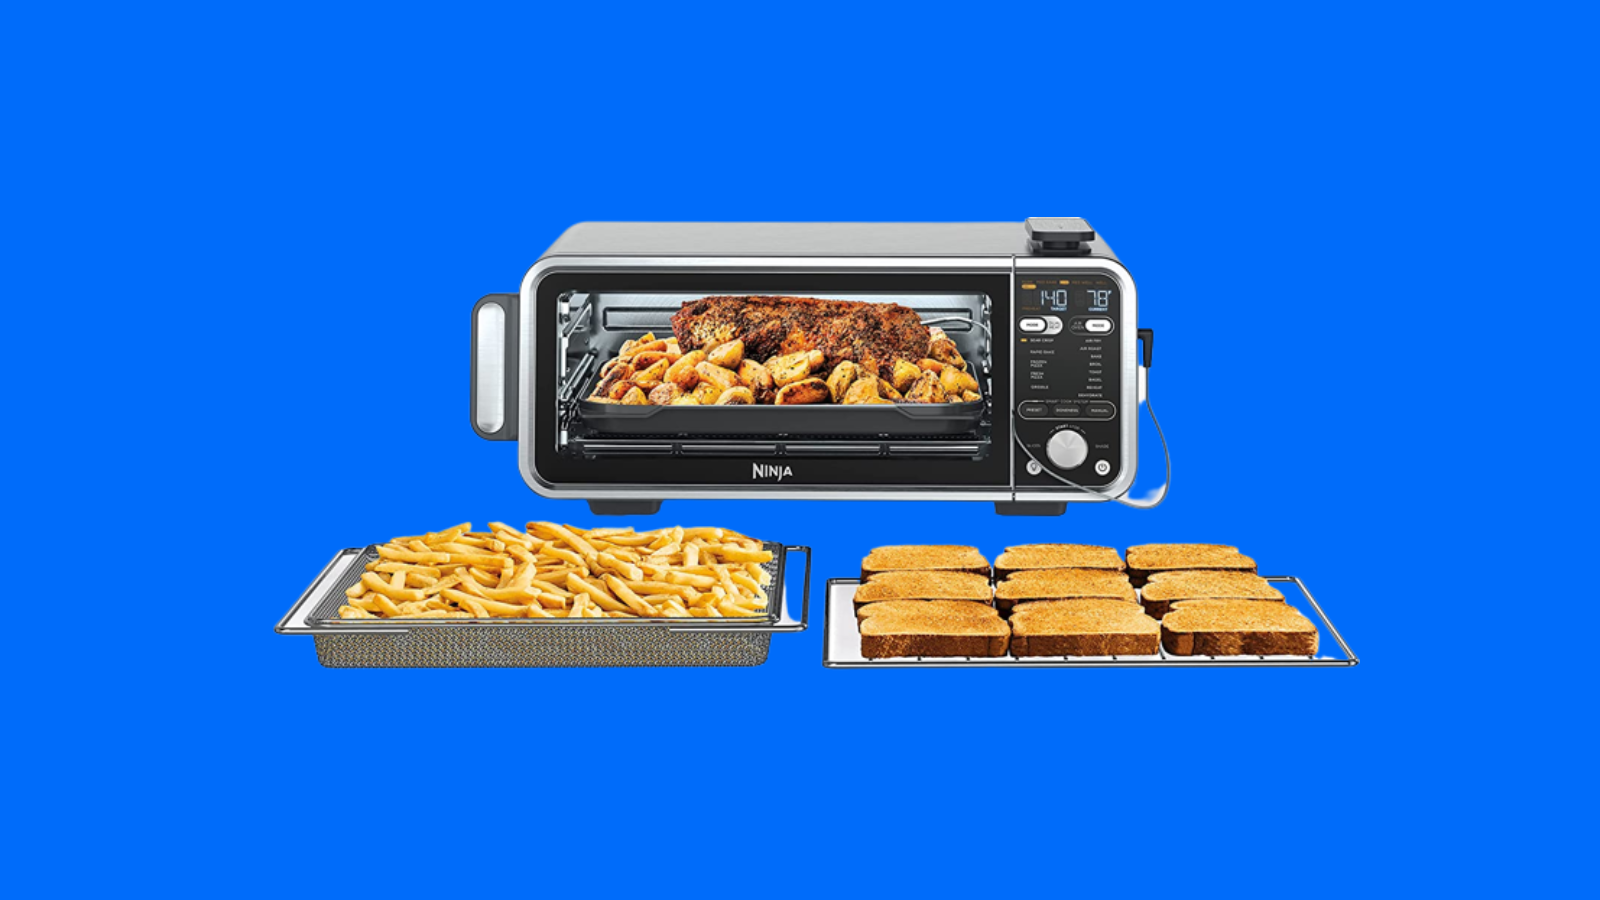 This 50% Off Deal Is the Perfect Time to Buy the Ninja Foodi Oven